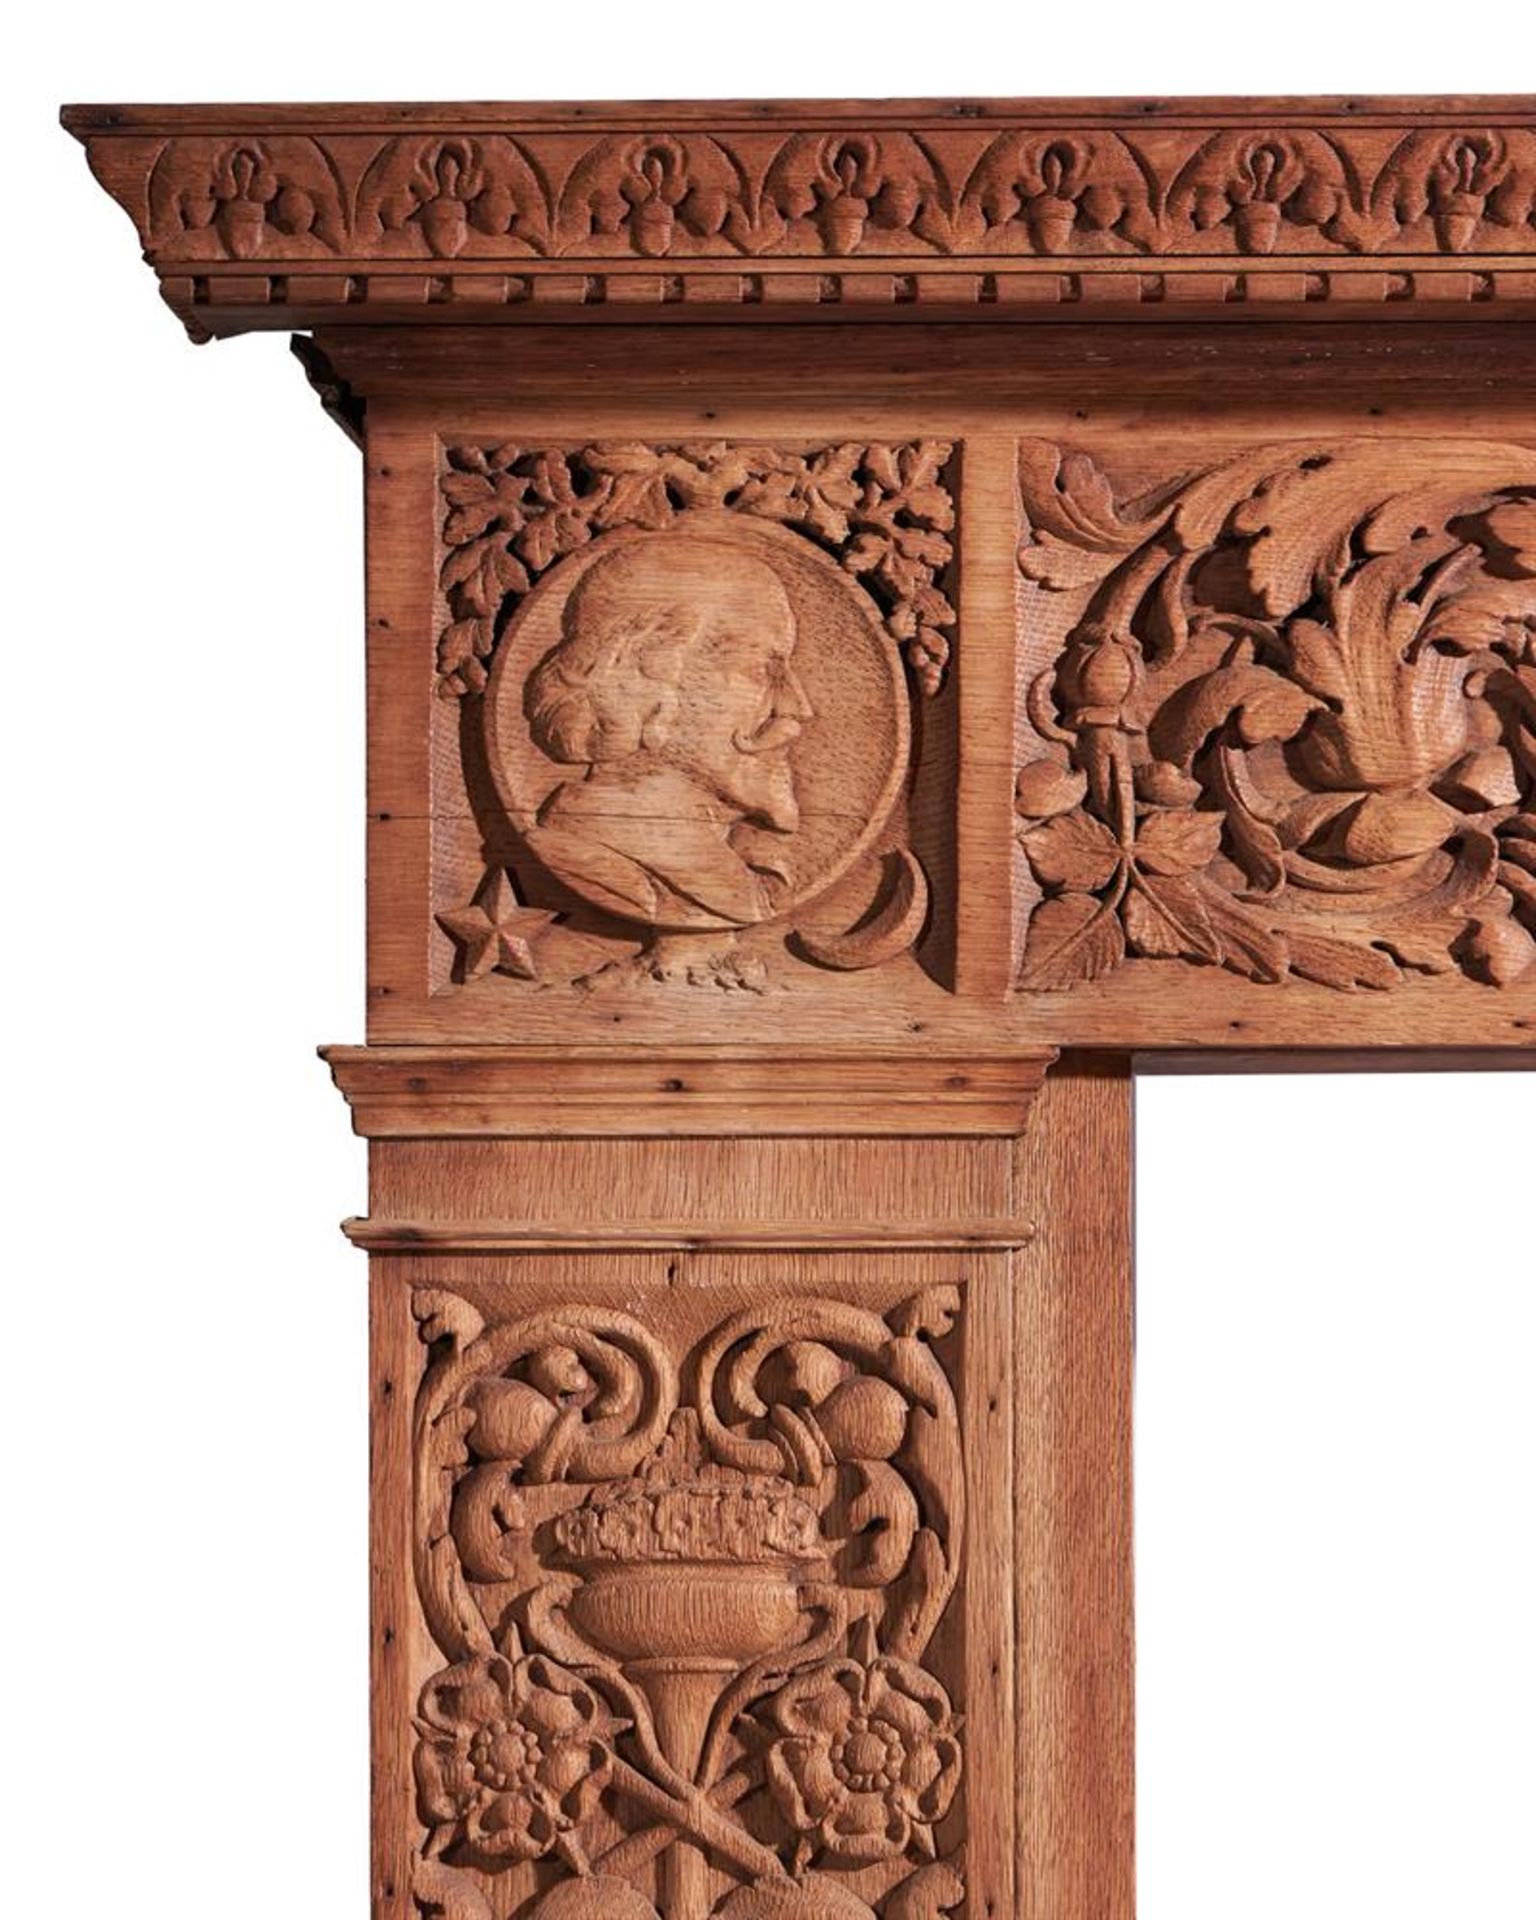 A VICTORIAN RENAISSANCE REVIVAL CARVED OAK CHIMNEYPIECE, LATE 19TH CENTURY - Image 3 of 6